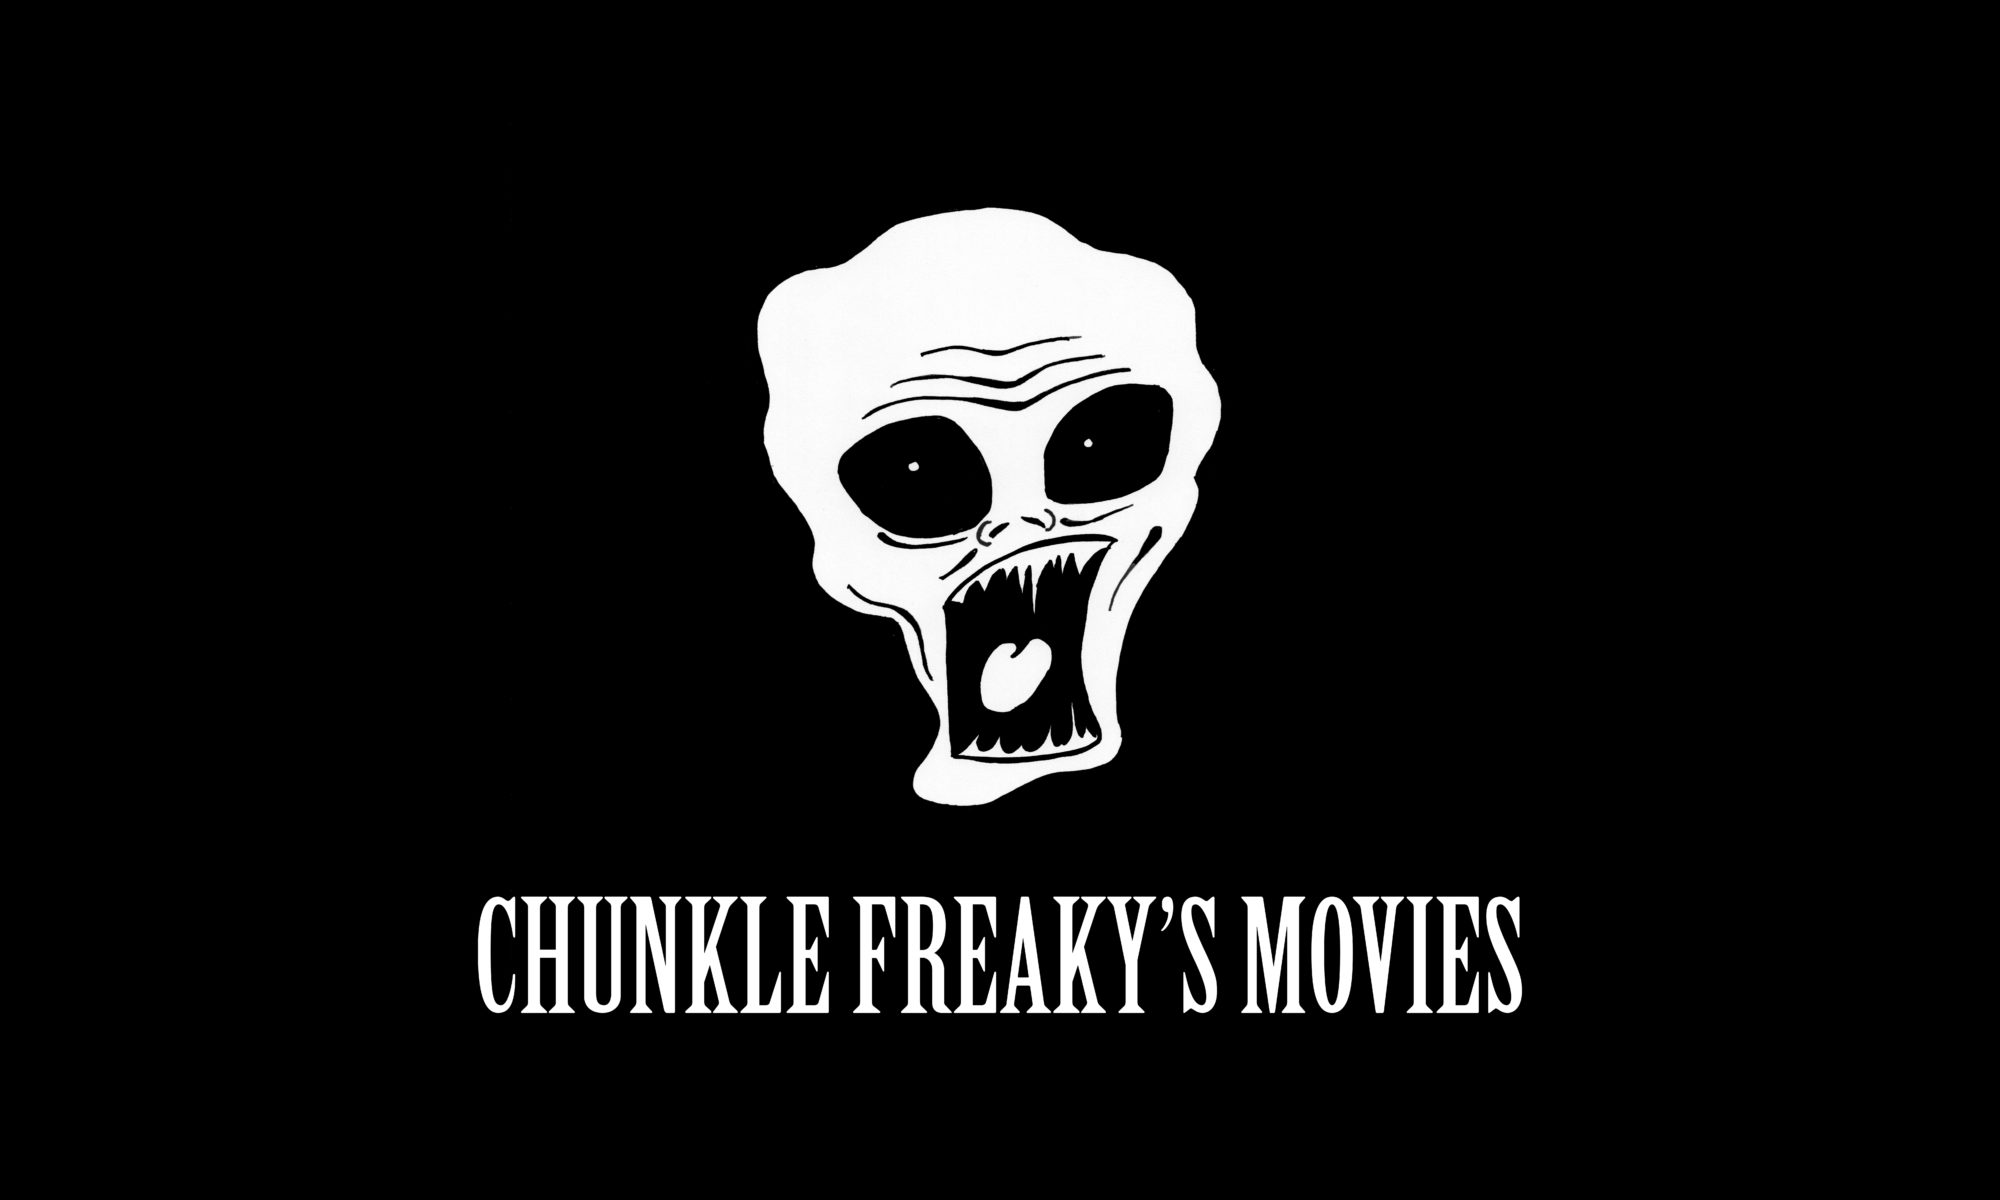 Chunkle Freaky's Movies